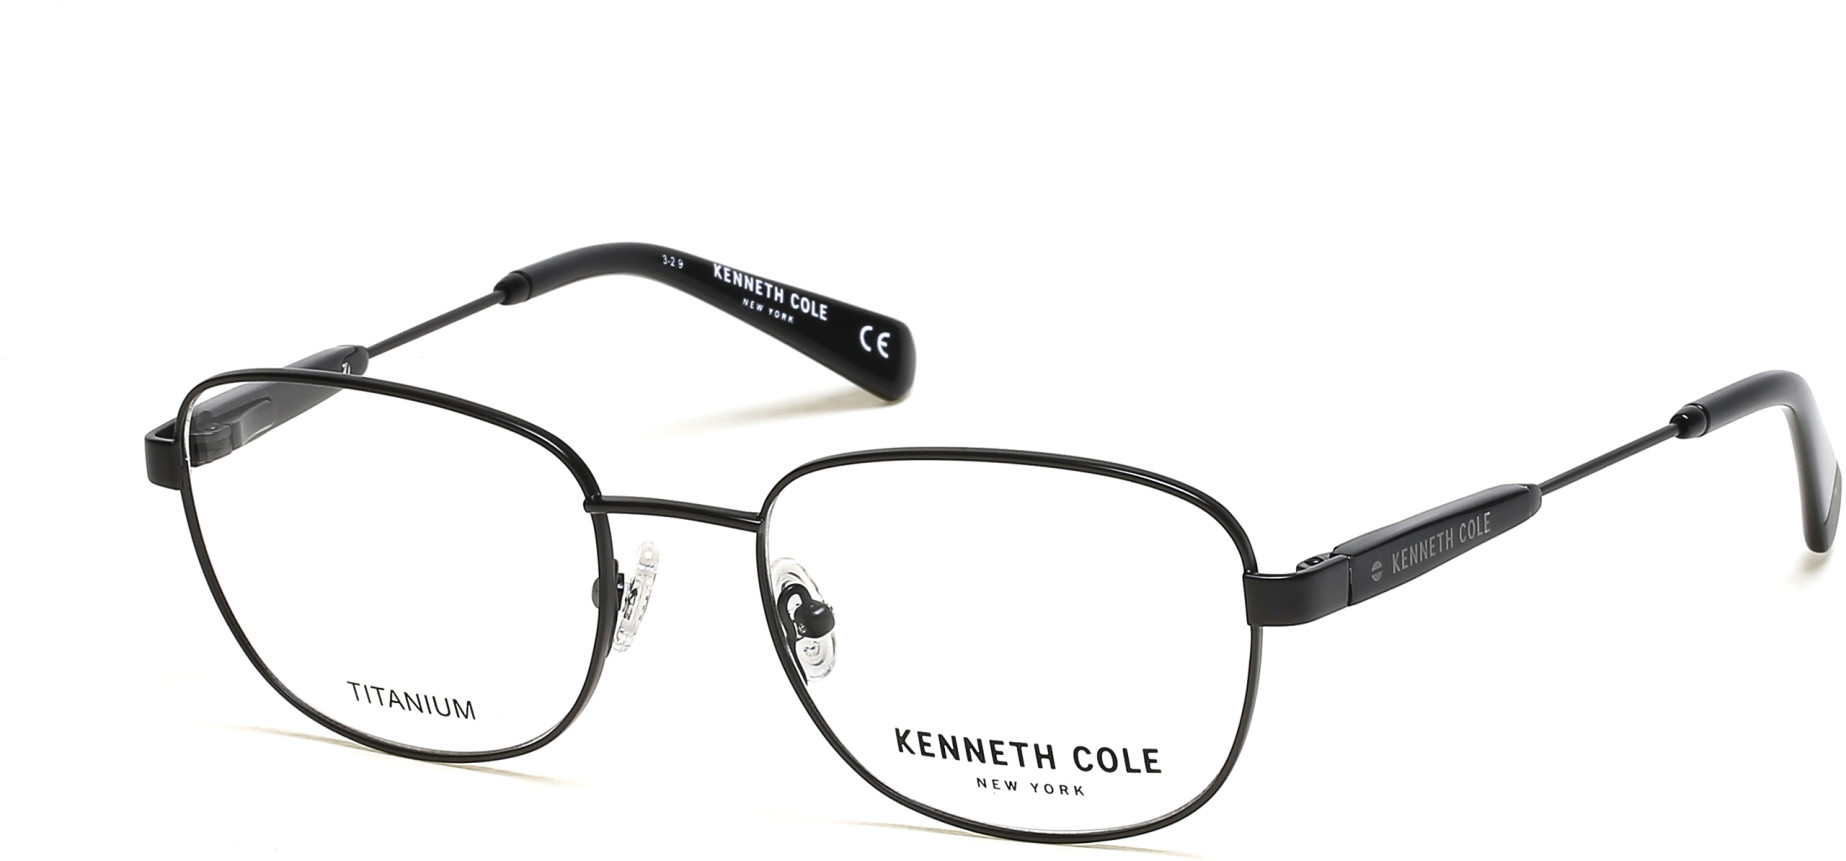 KENNETH COLE NY 0299